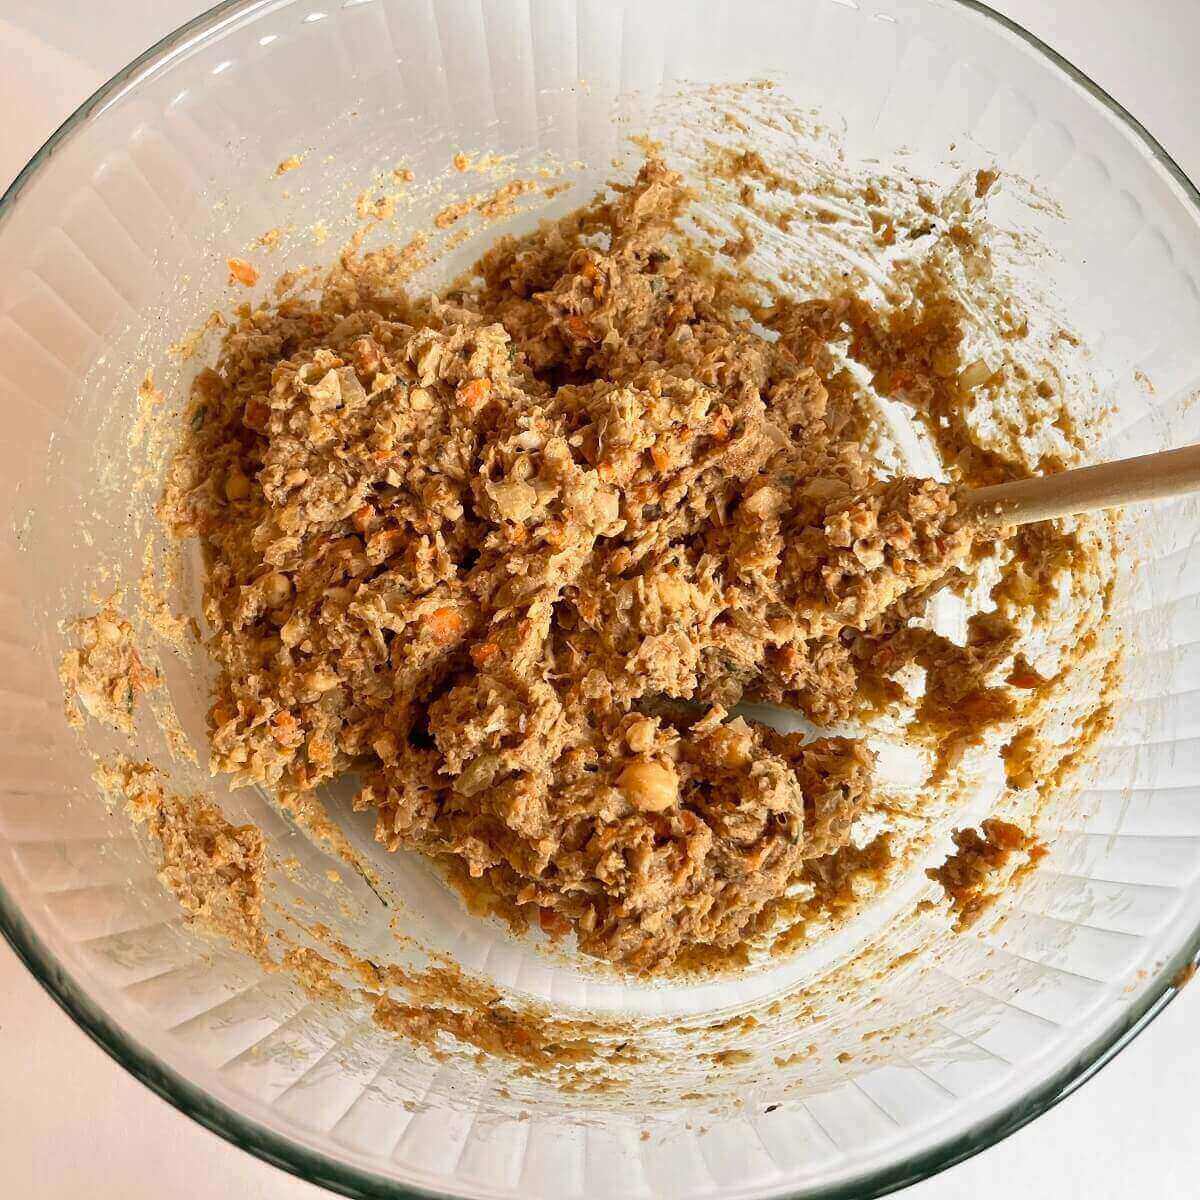 Raw meatloaf batter in a large mixing bowl.